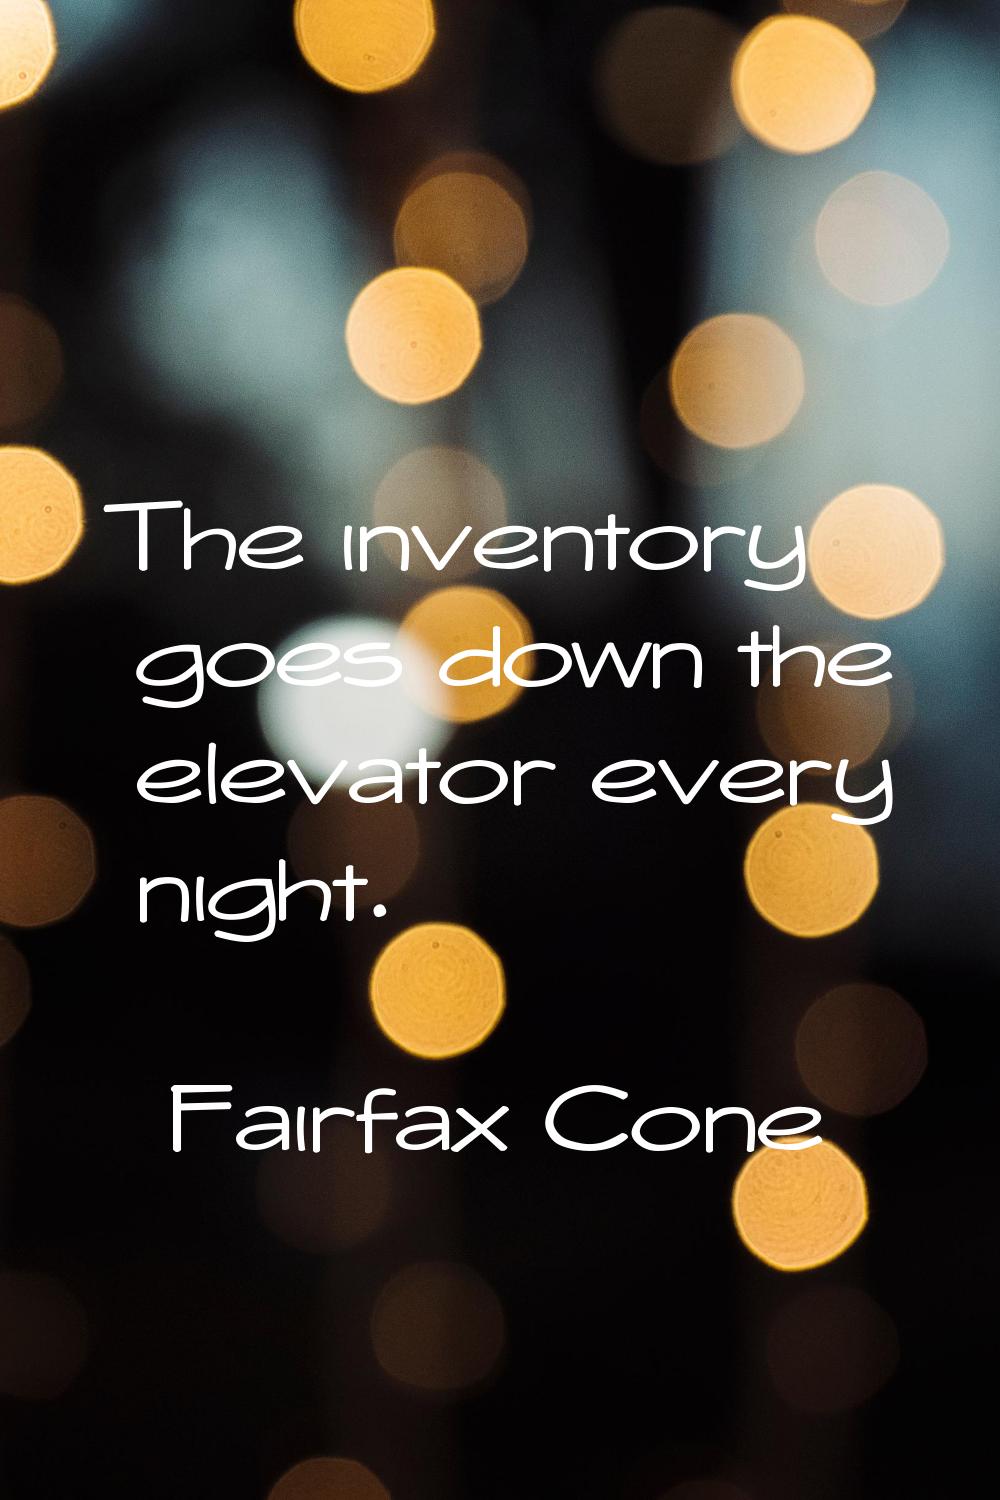 The inventory goes down the elevator every night.